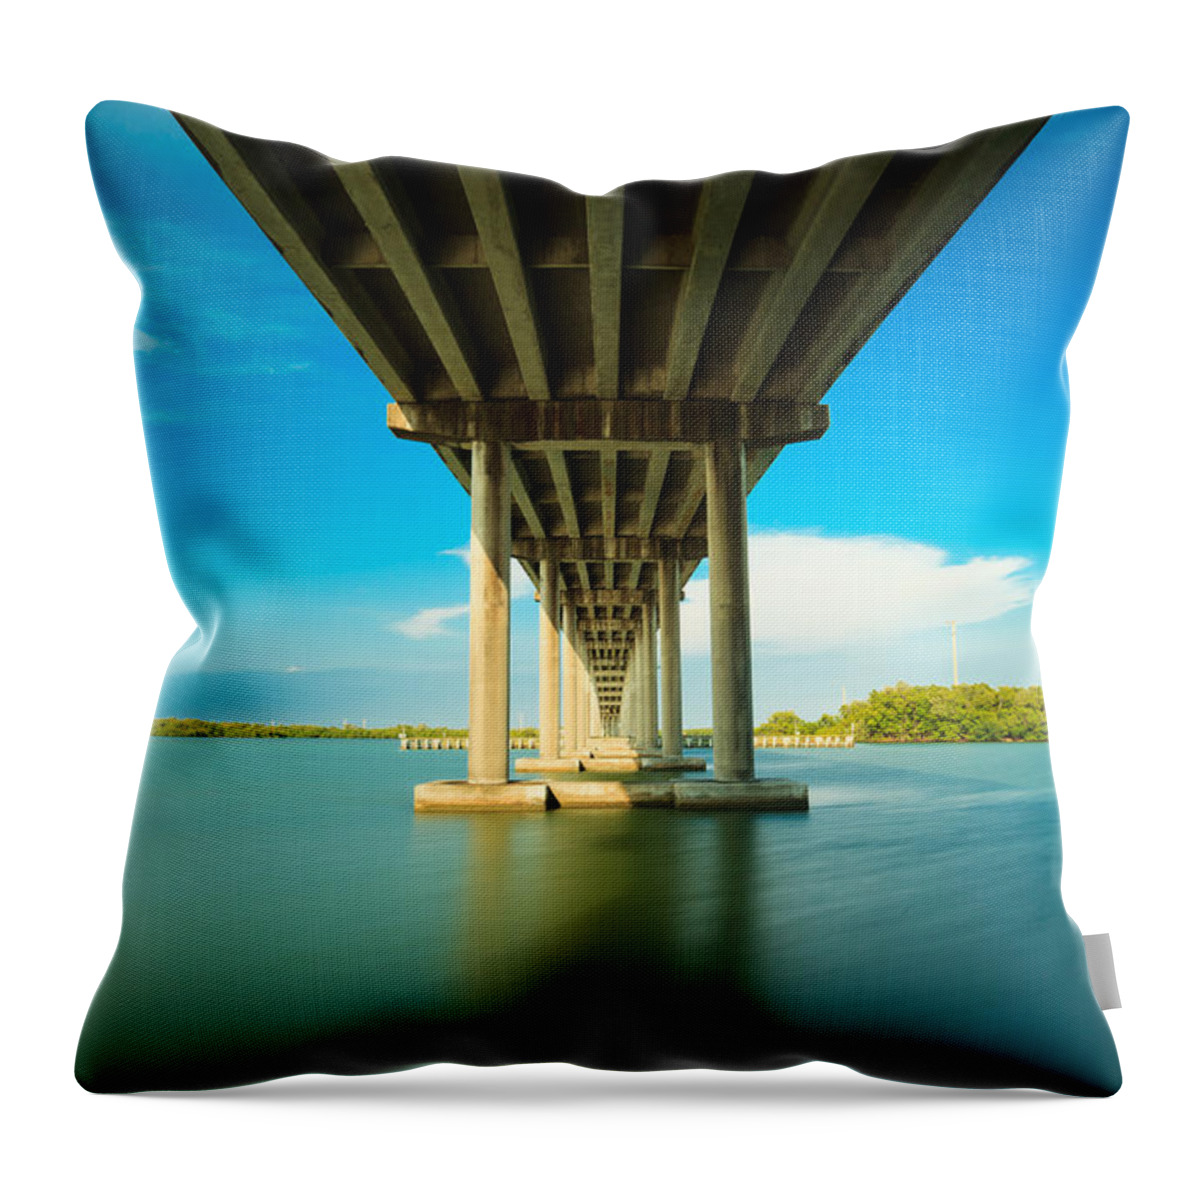 Everglades Throw Pillow featuring the photograph San Marco Bridge by Raul Rodriguez